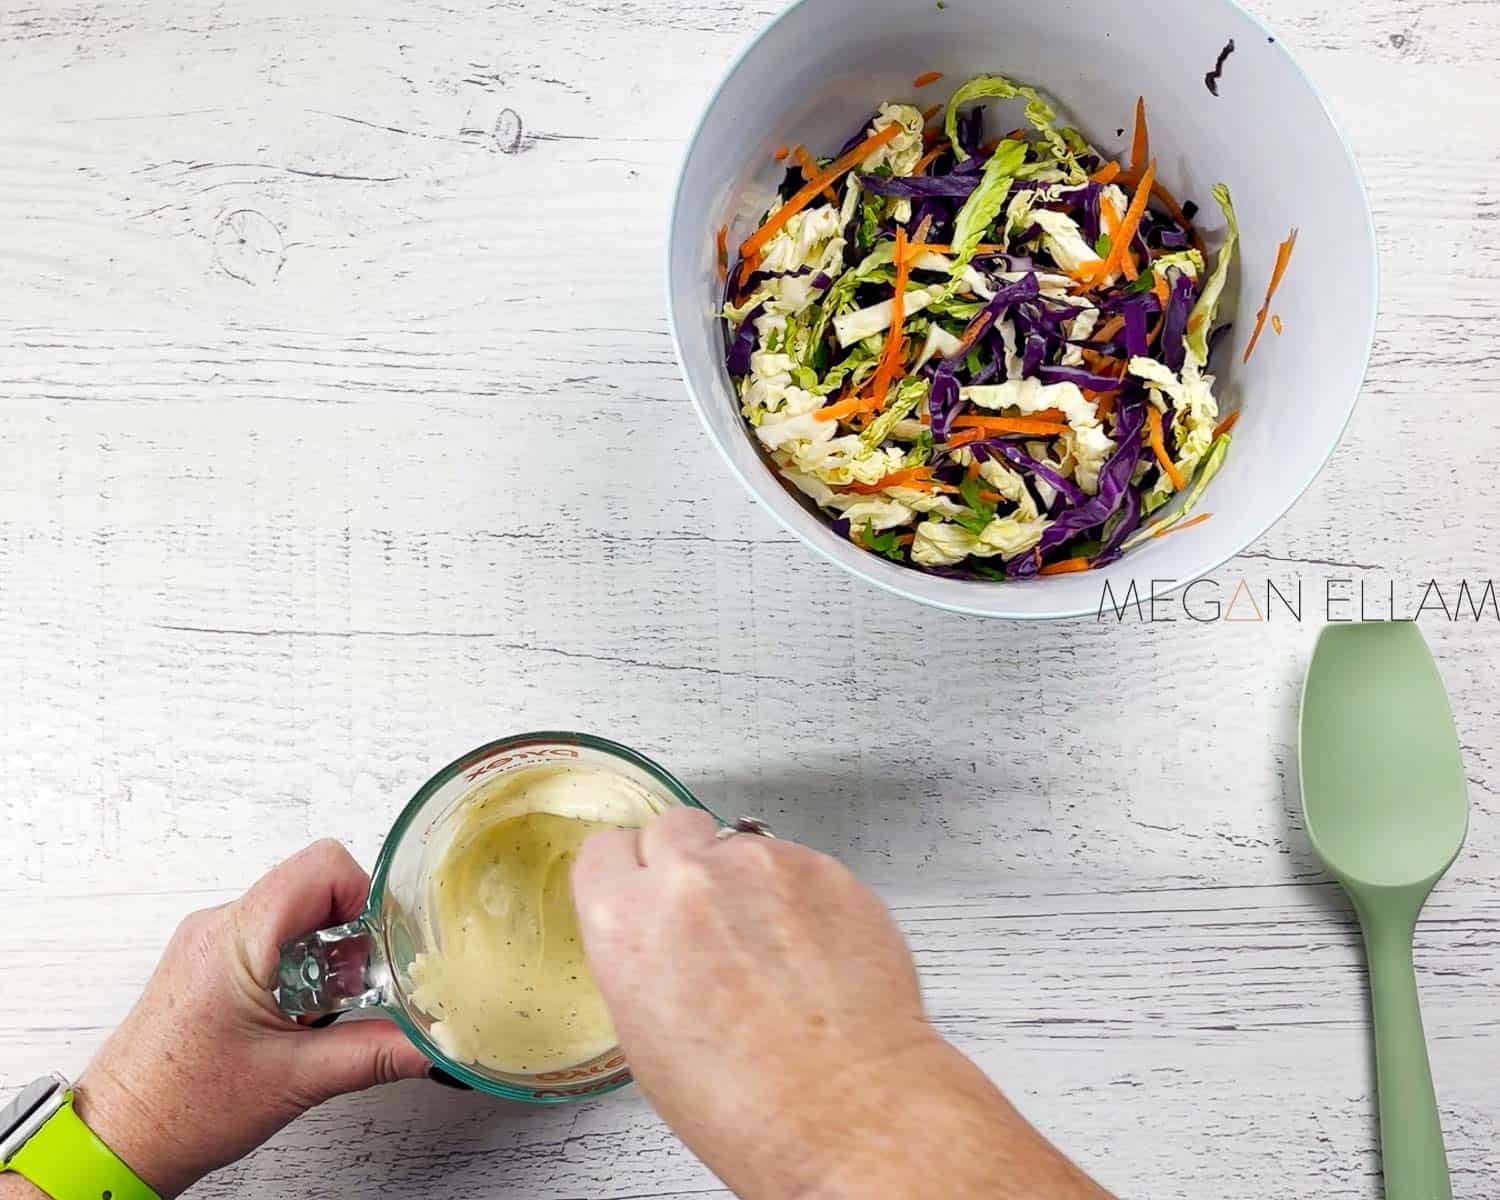 Mixing coleslaw dressing in a jug.